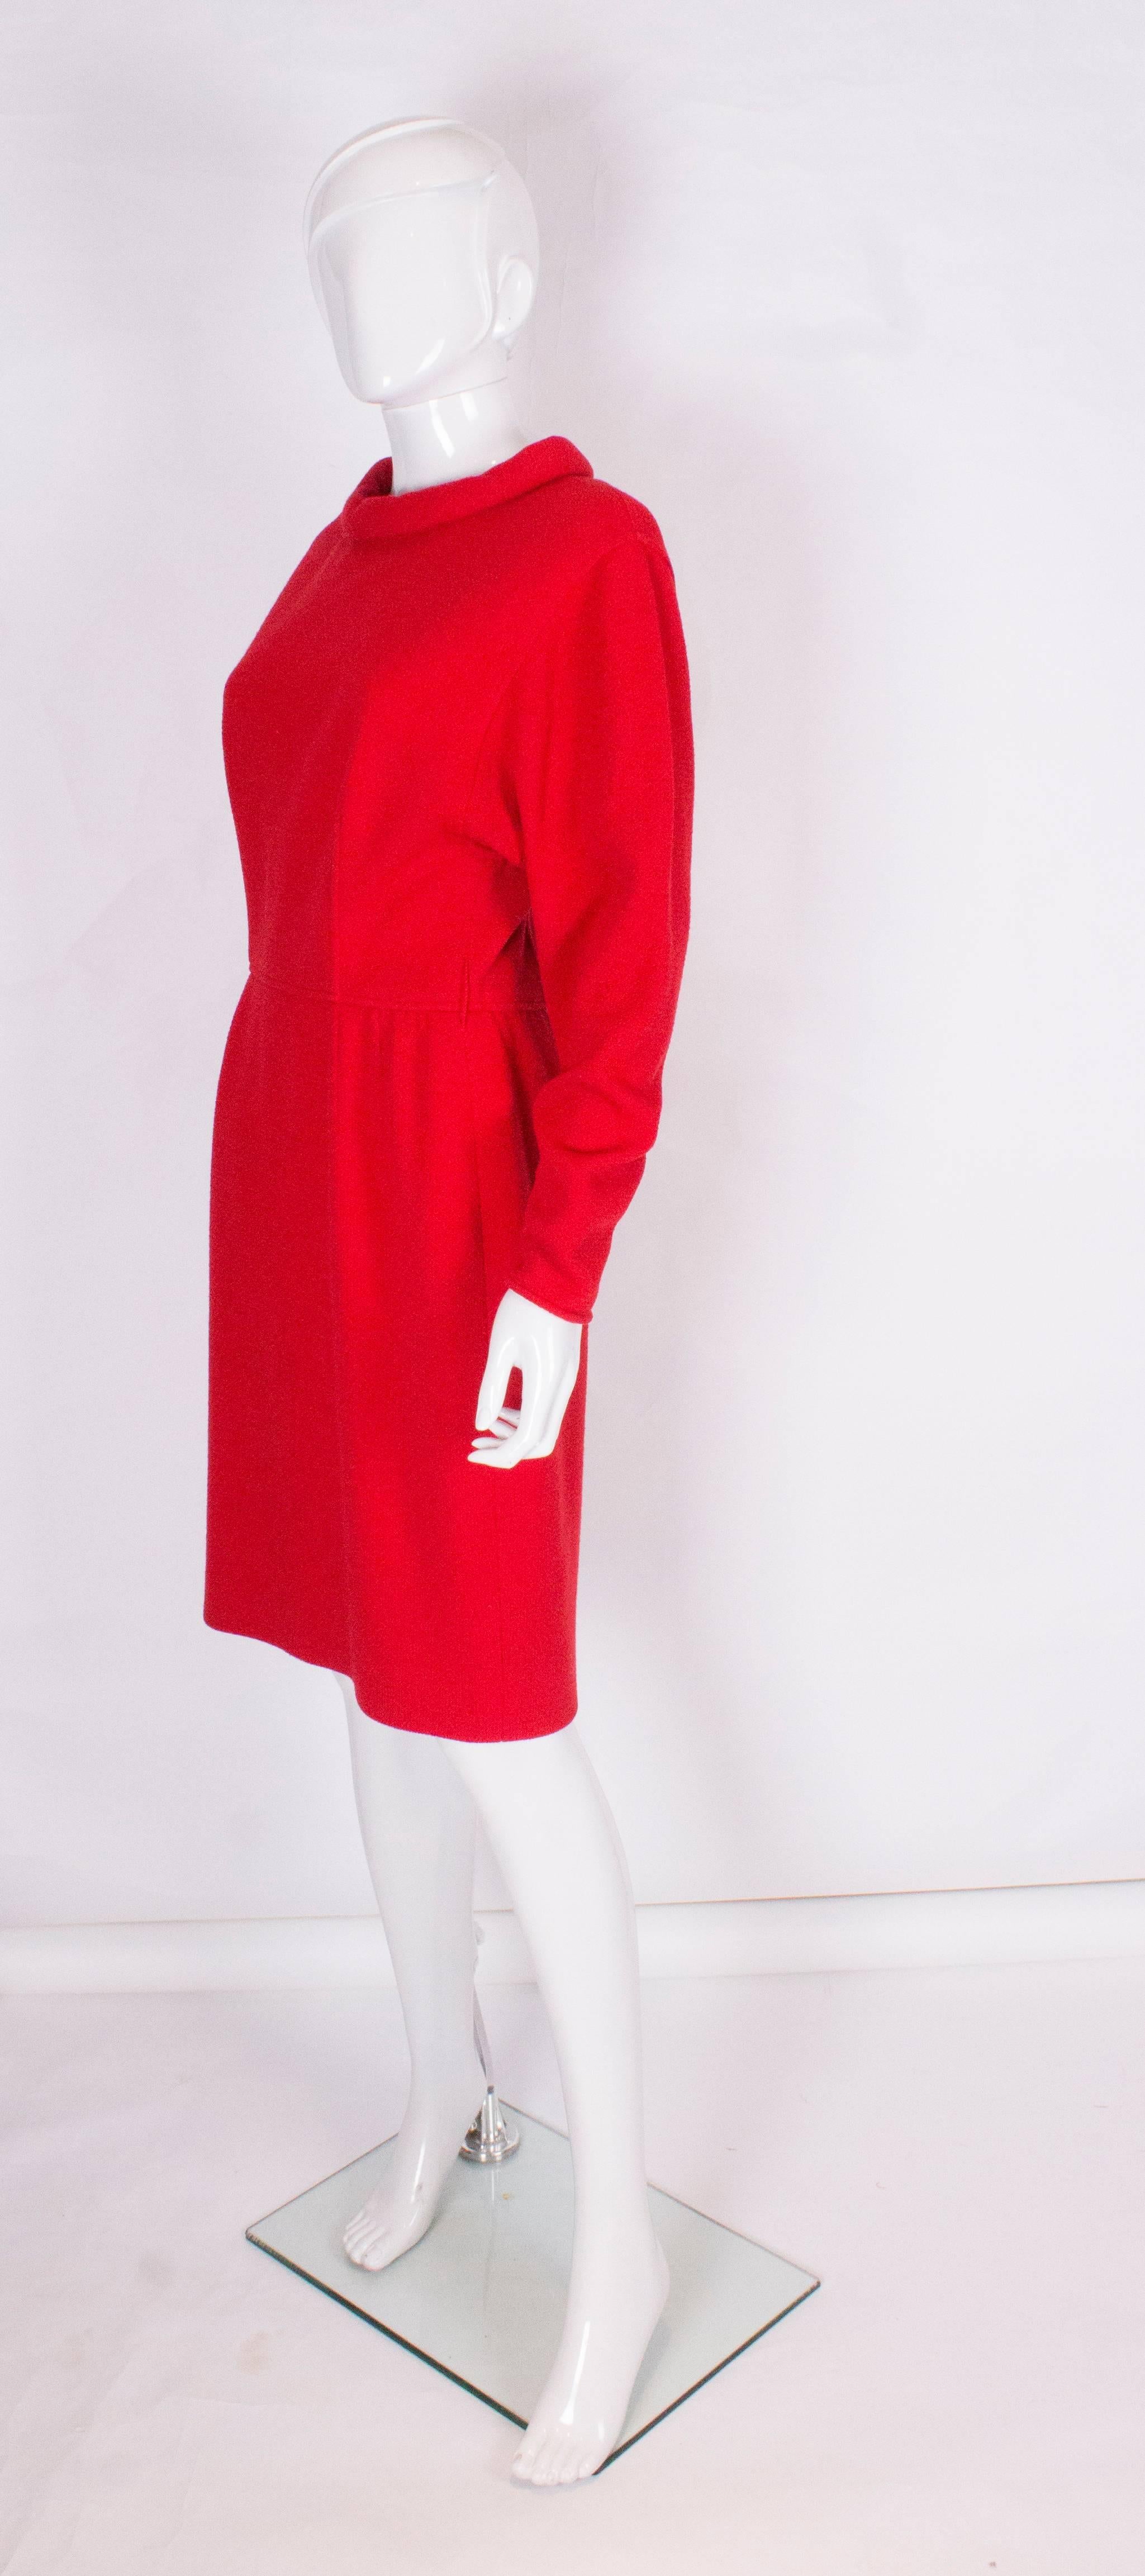 A chic red dress by Valentino. The dress has a low round neck line, with a 6 button back opening to the waist, and a zip opening from the waist down.There are 3 1/2'' zip openings on each sleeve.The dress is fully lined.